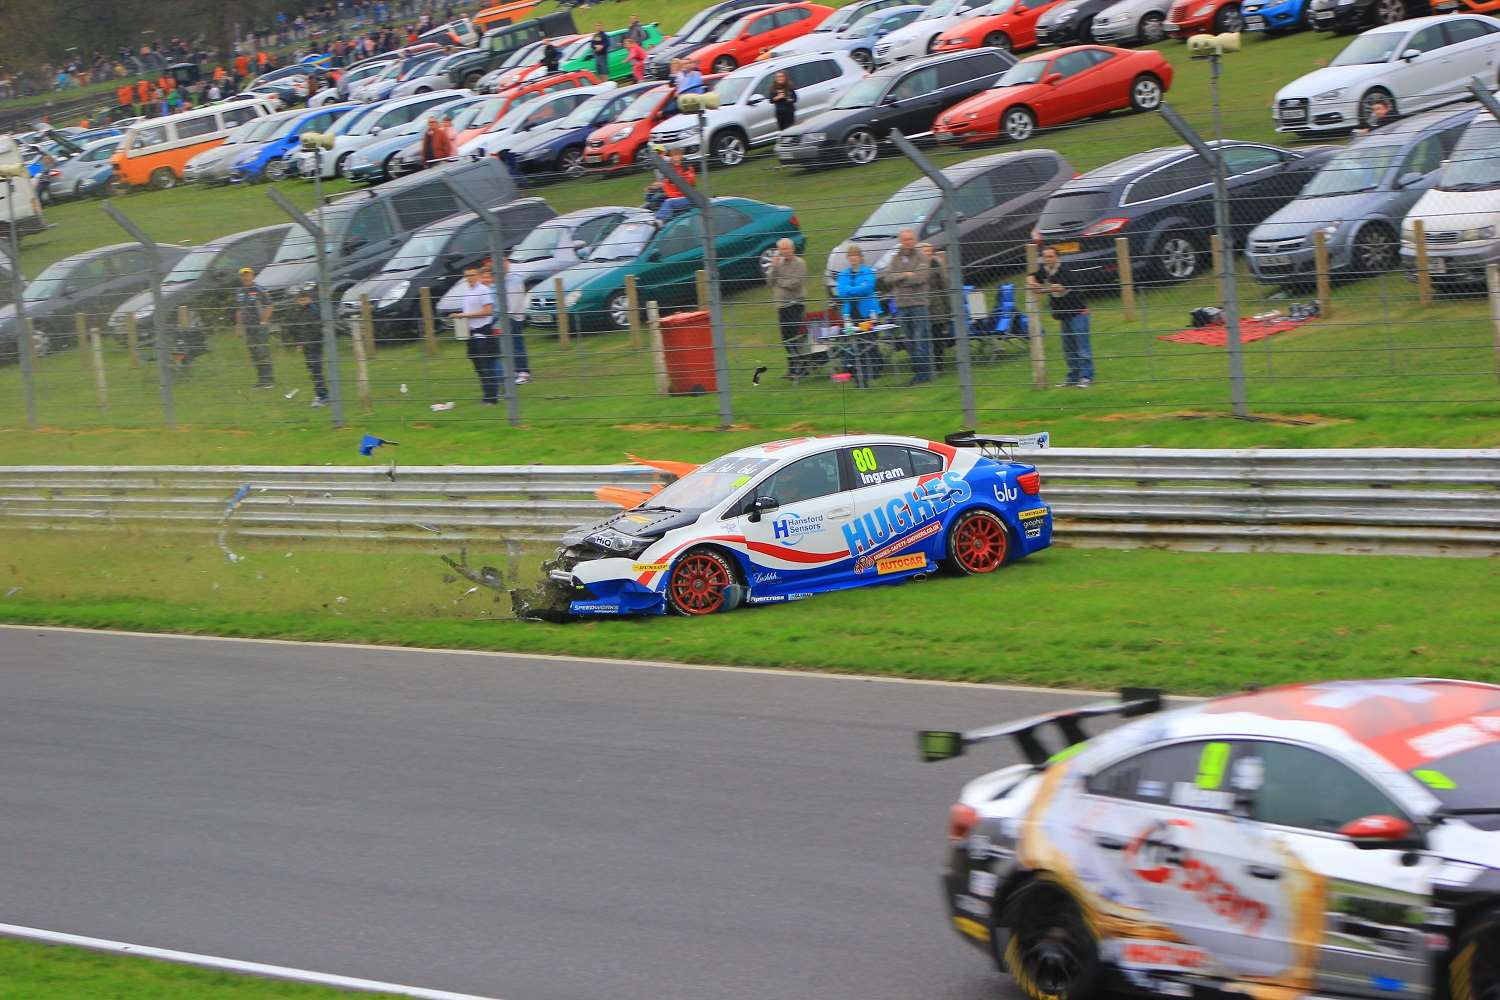 Youngster Tom Ingram had a nasty off in race three. Picture - Joe Wright